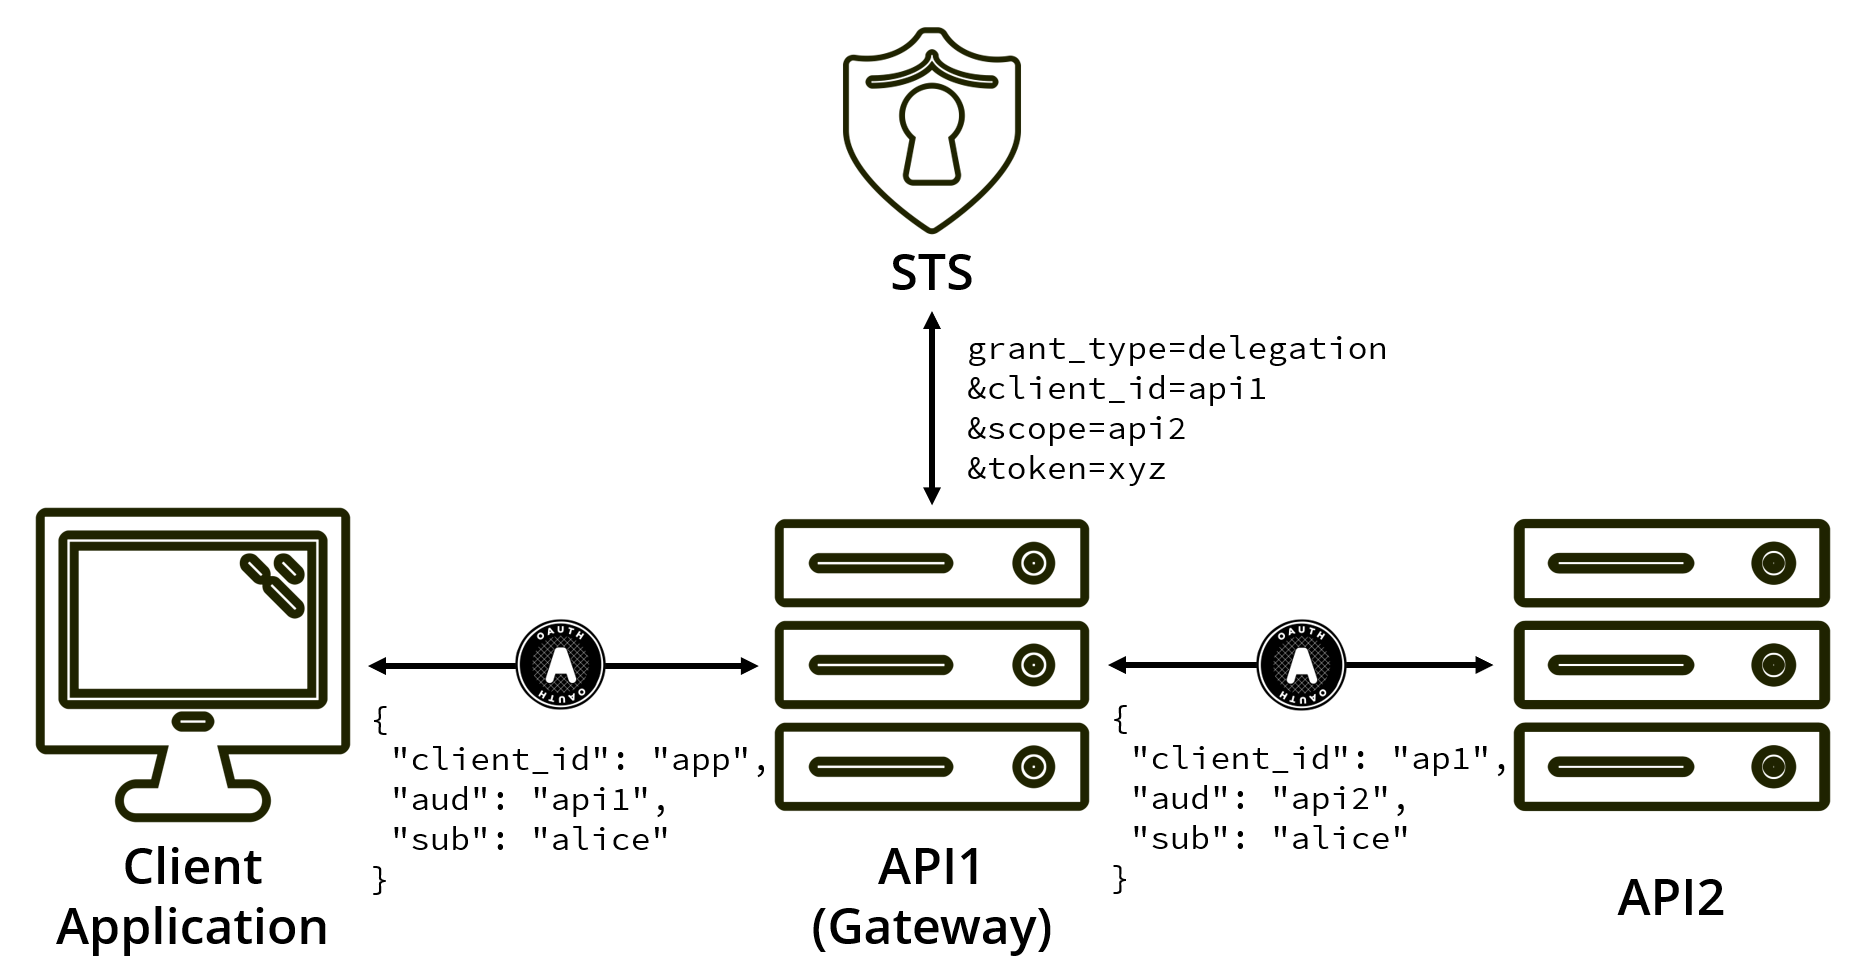 An API gateway using a custom grant to swap an incoming token for a new access token, keeping track of user, calling application, and appropriate scopes